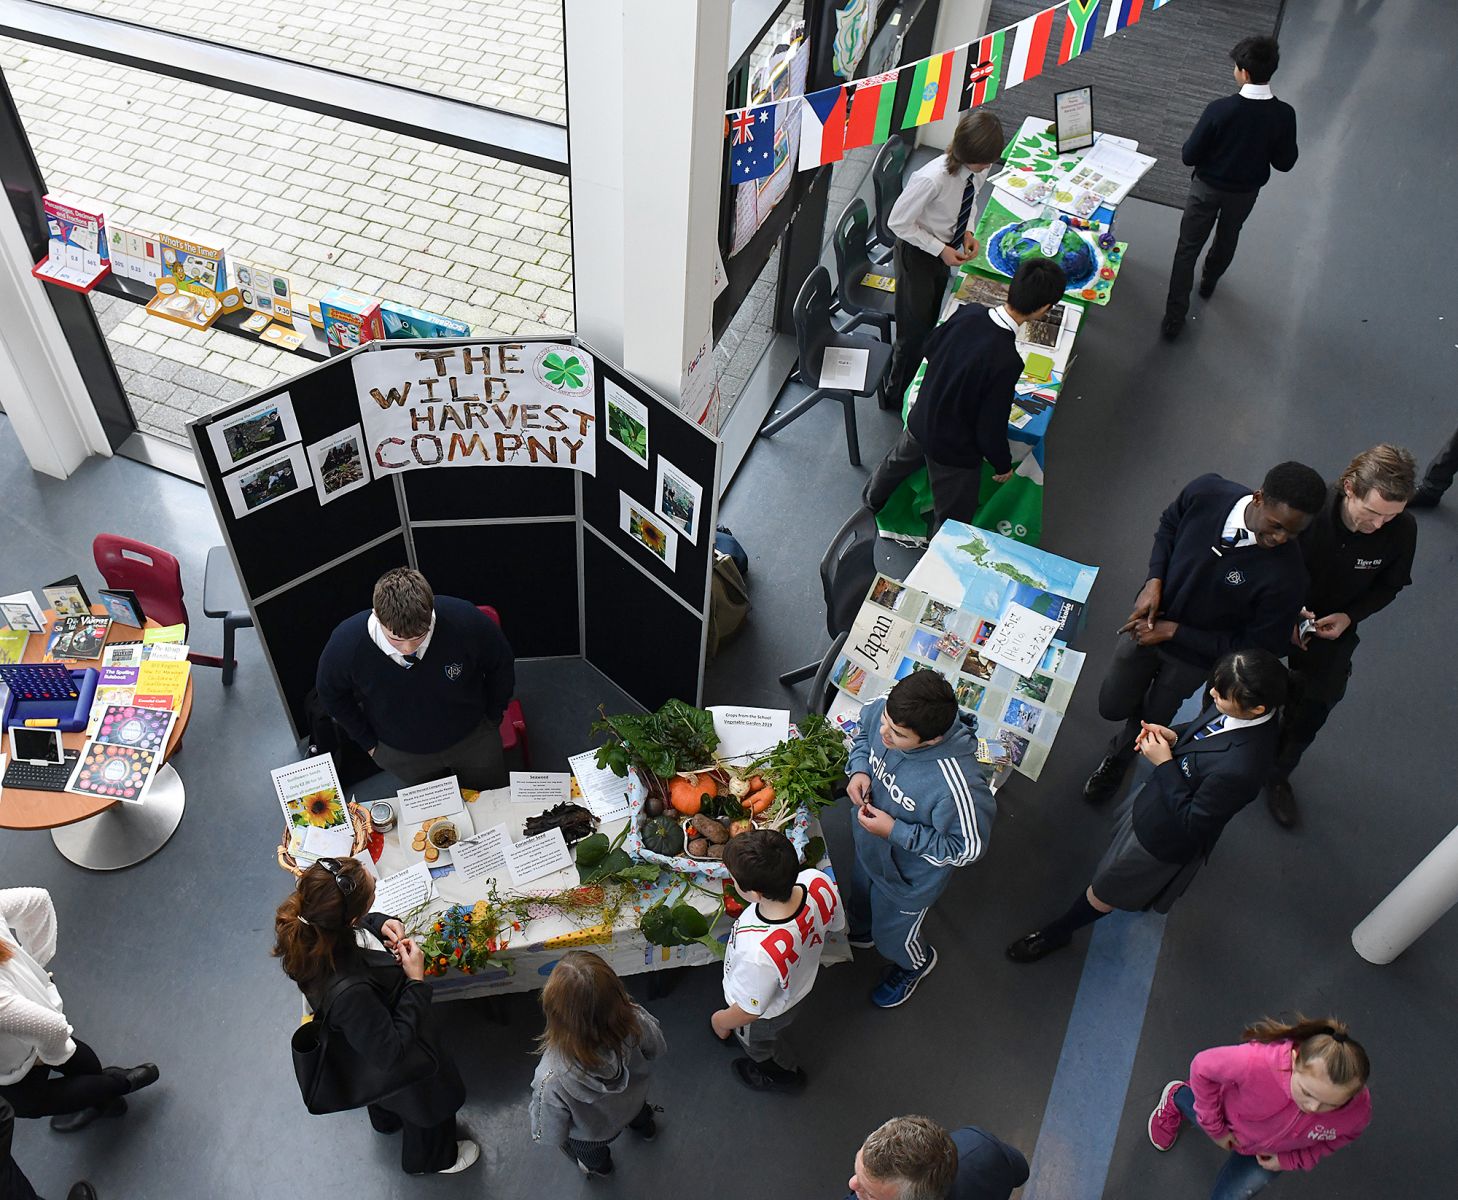 The wild harvest company on display, one of the many stands at the Dundalk Grammar School Open Day. Picture Ken Finegan/Newspics